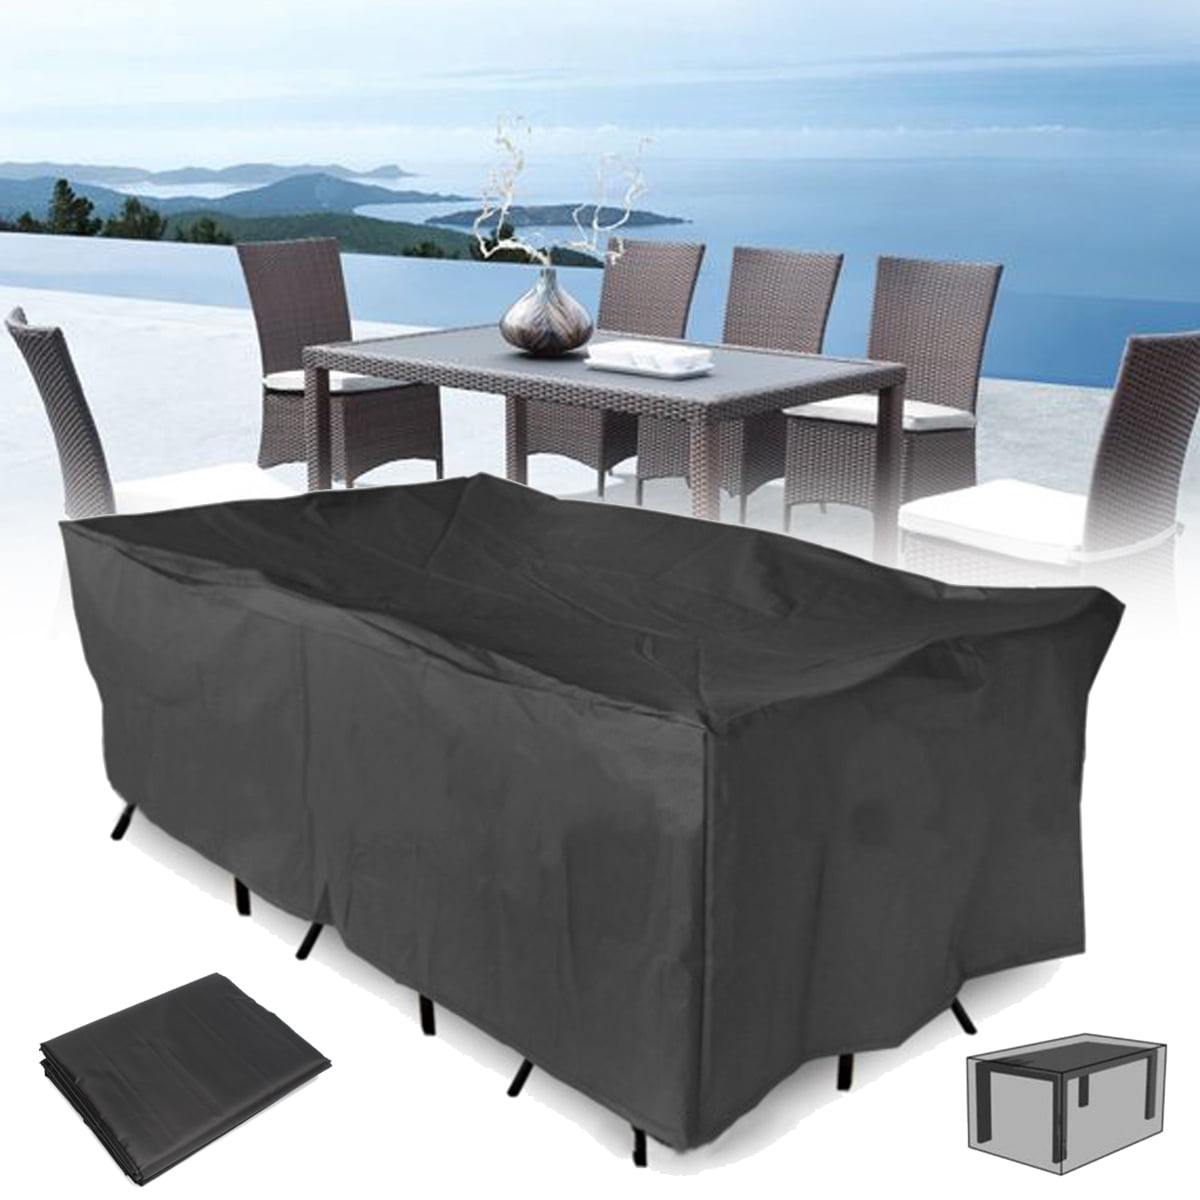 Large Furniture Cover Outdoor Garden, Outdoor Table And Chair Waterproof Cover